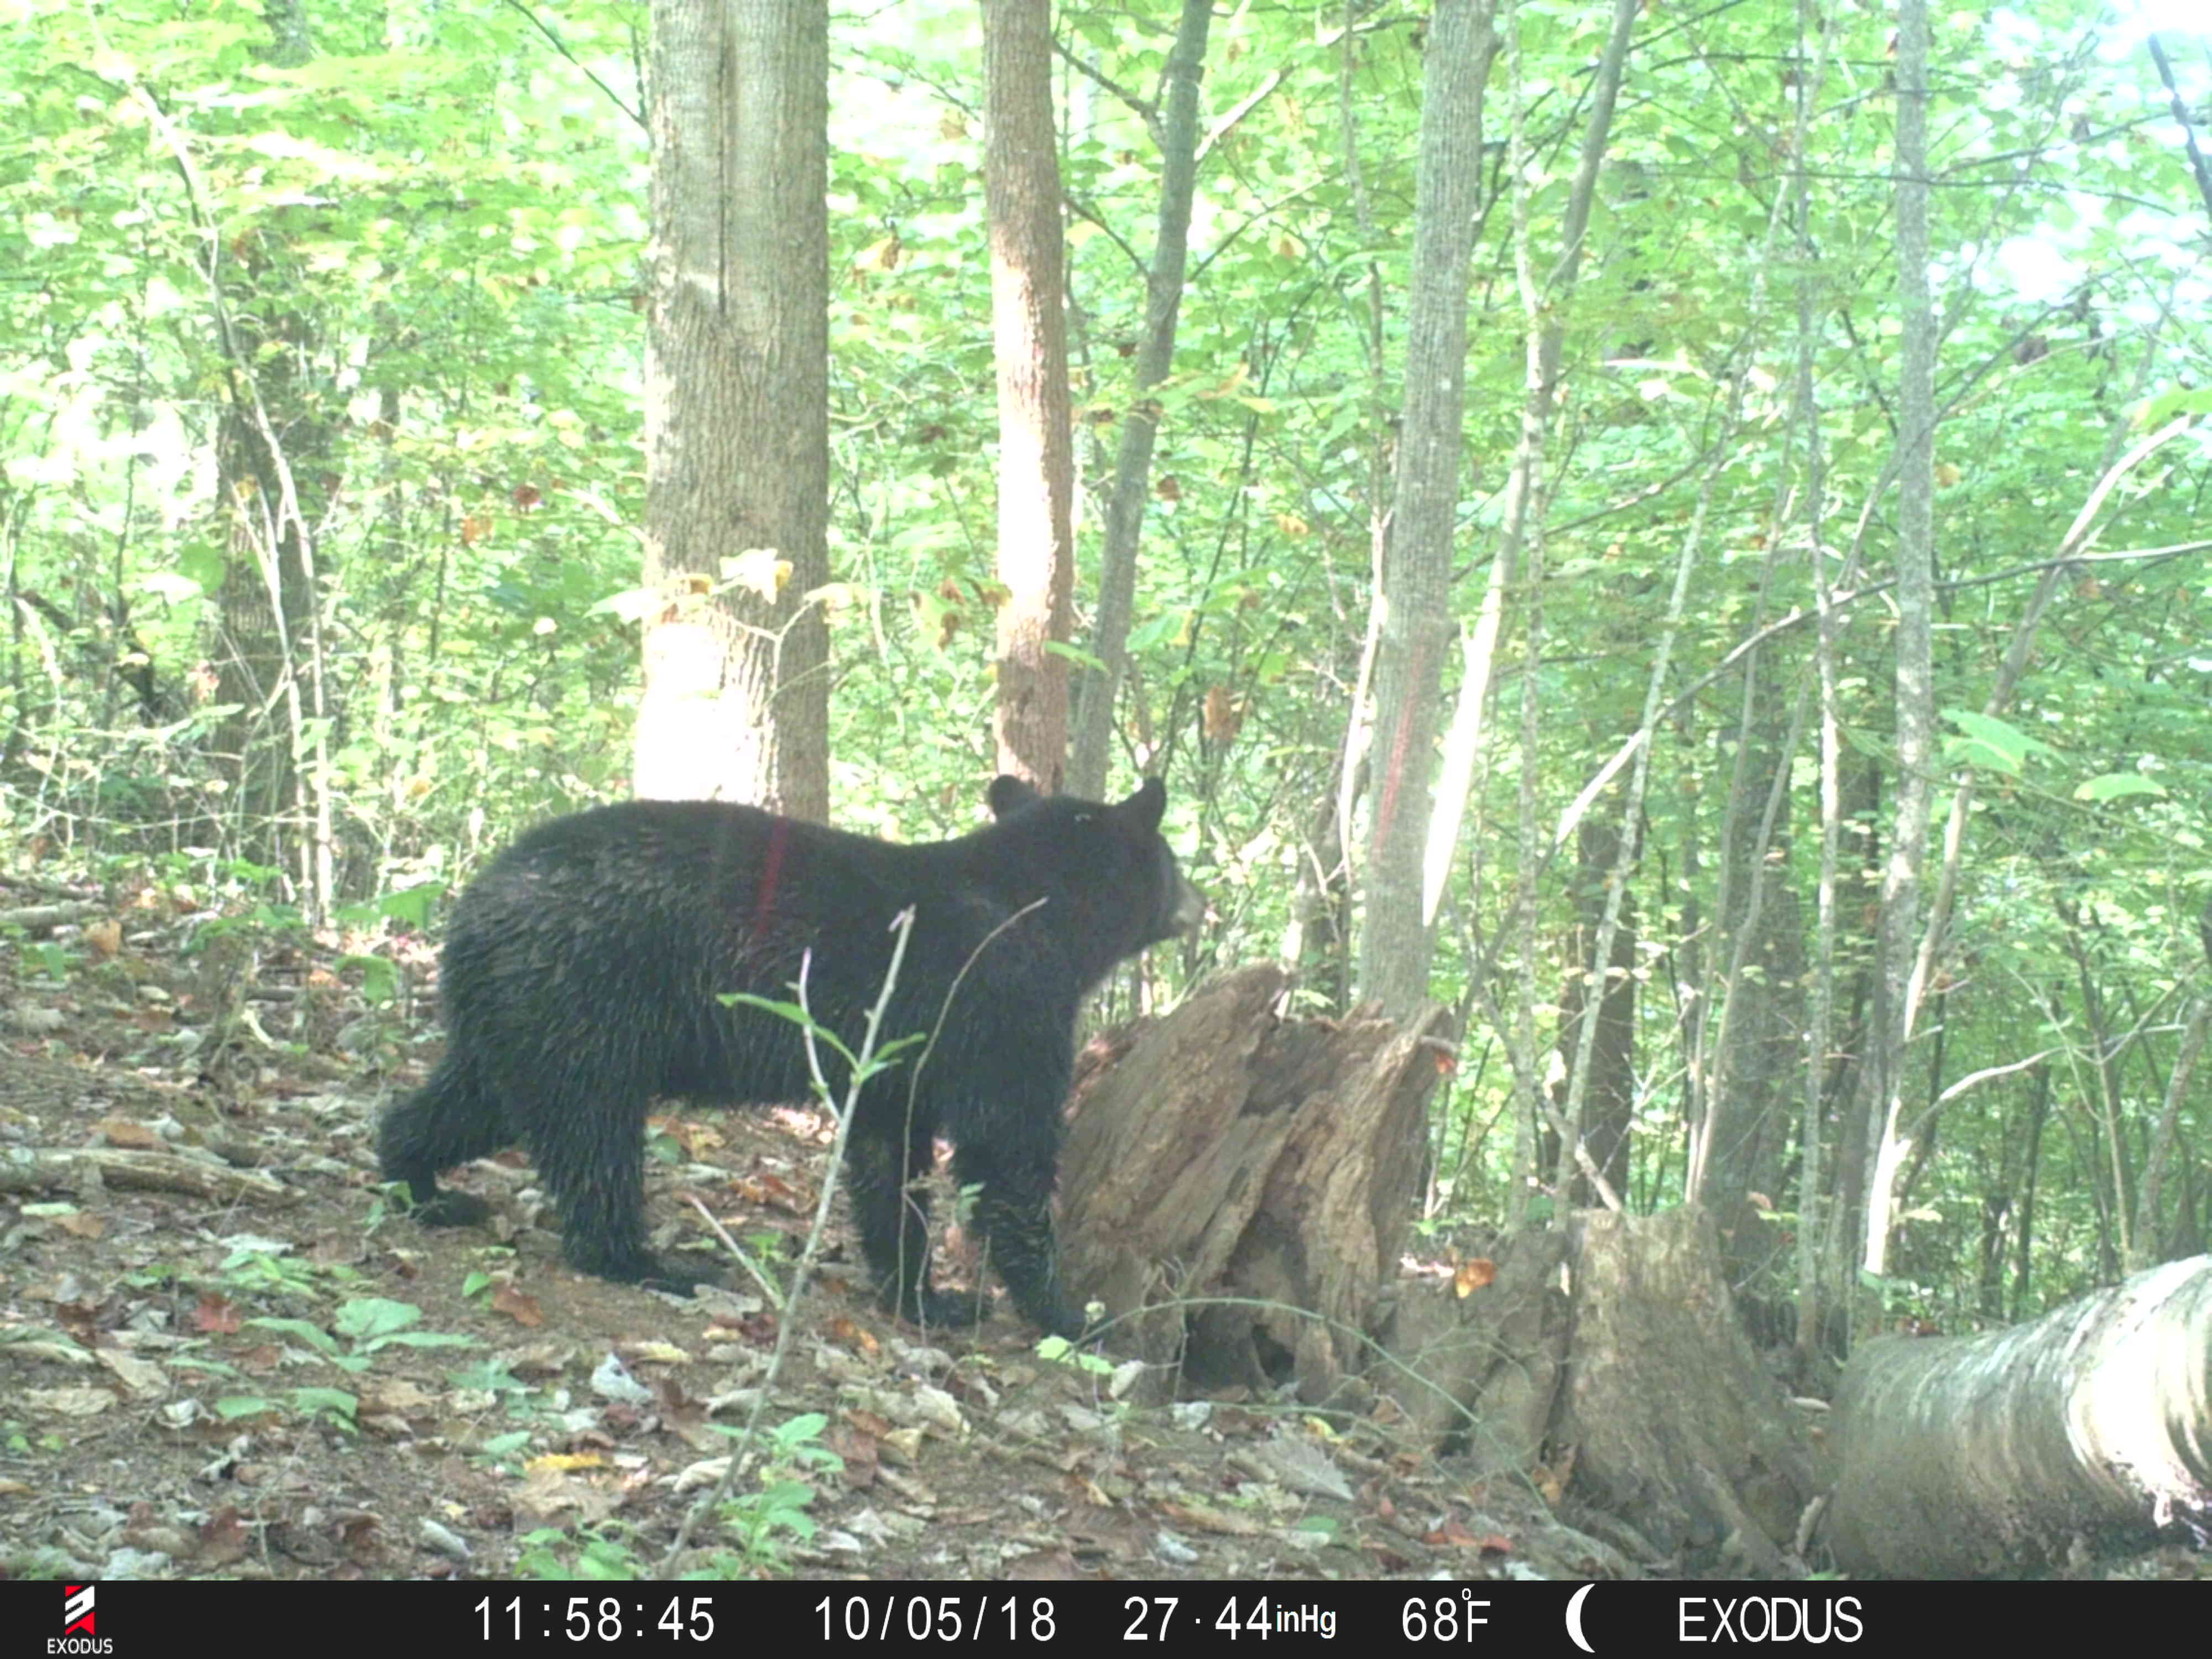 (2/4) He had it out before, but the camera did not work, and the bear tore apart another stump location and tore the bark off the tree where he poured it down the bark.